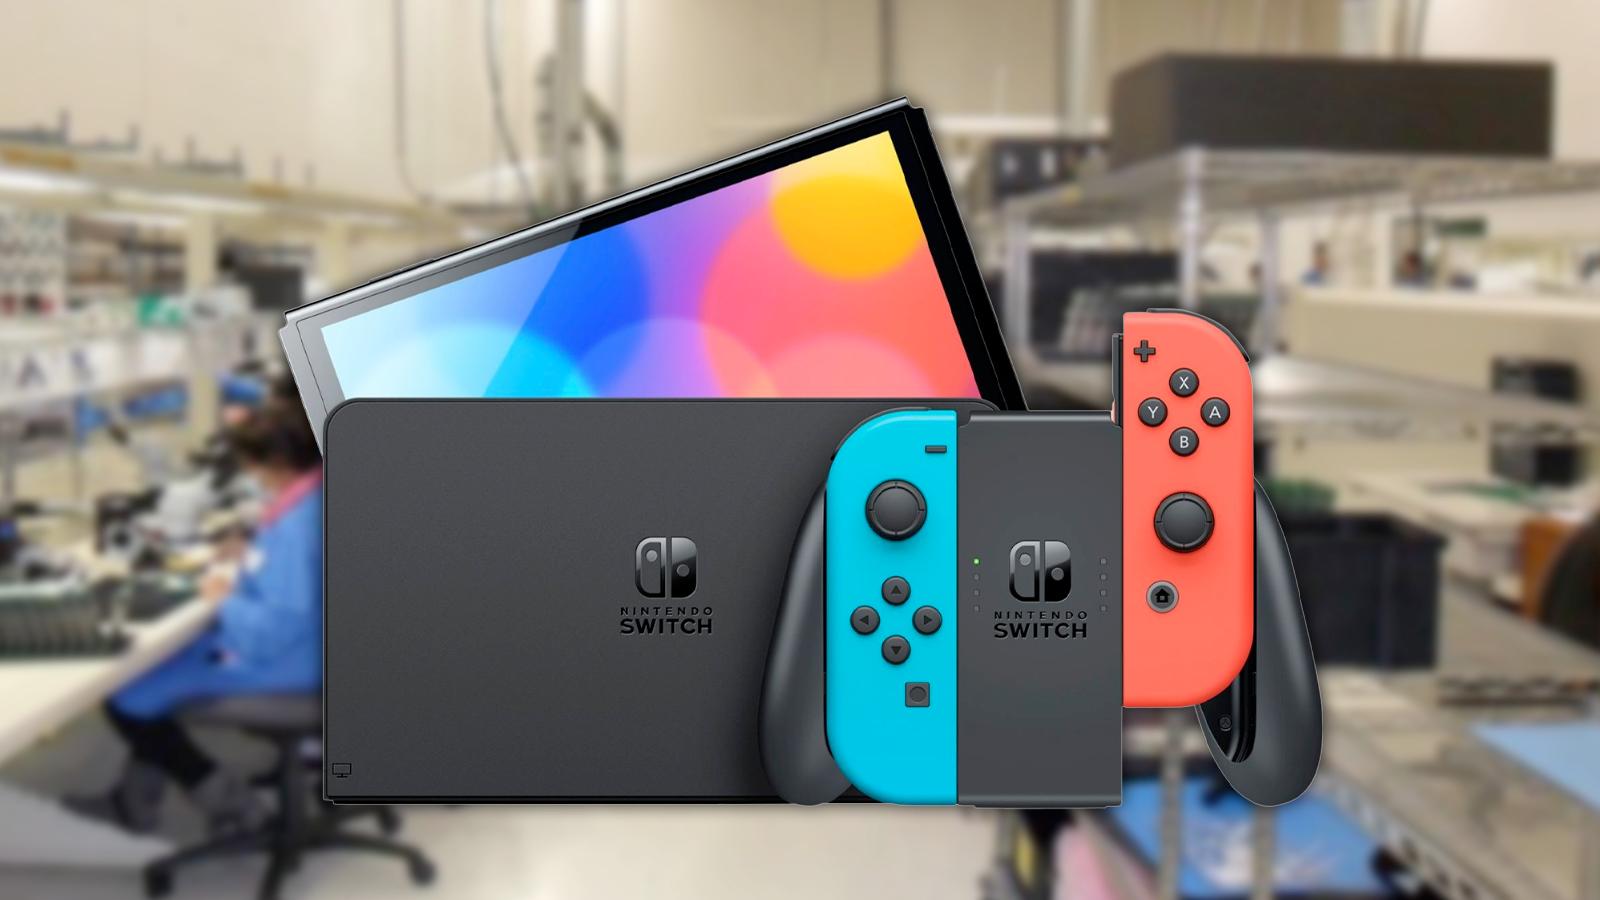 Nintendo Switch in front of a blurred image of a factory